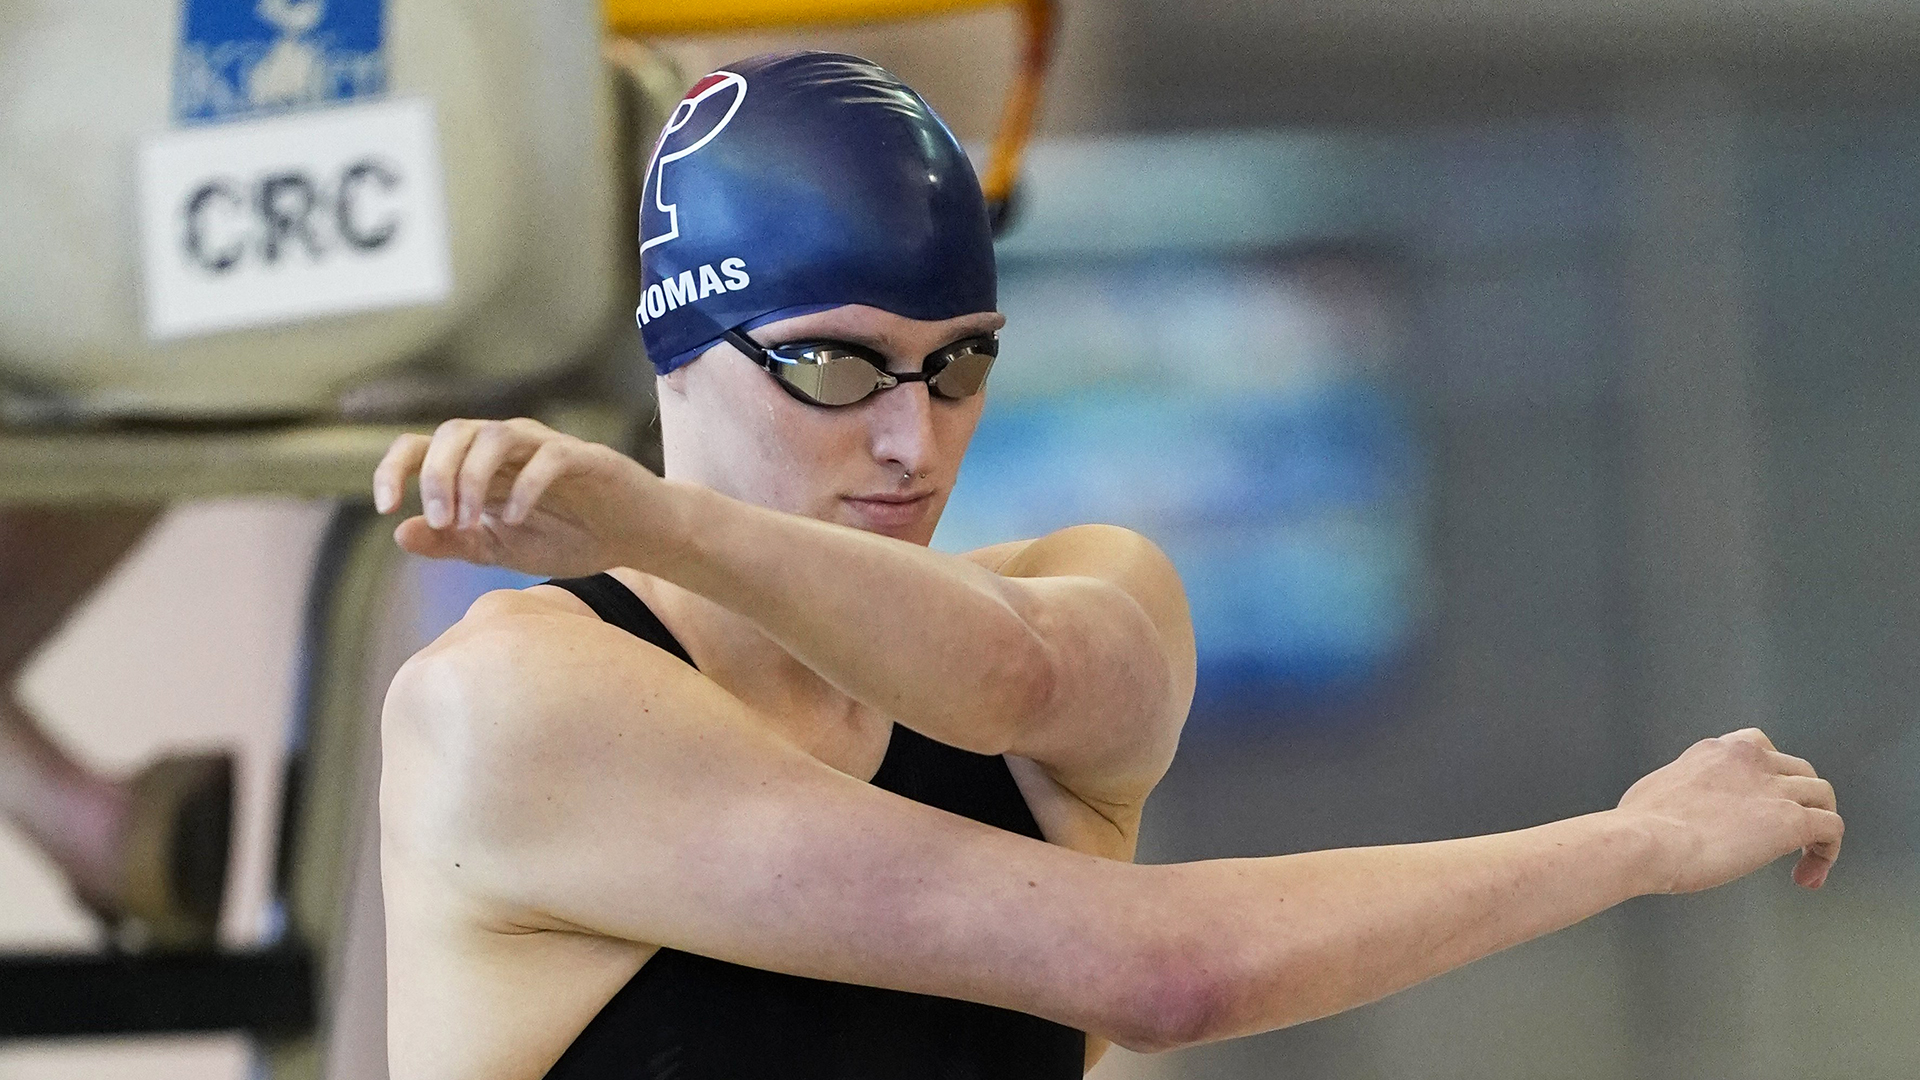 Trans swimmer Lia Thomas nominated for NCAA Woman of the Year award